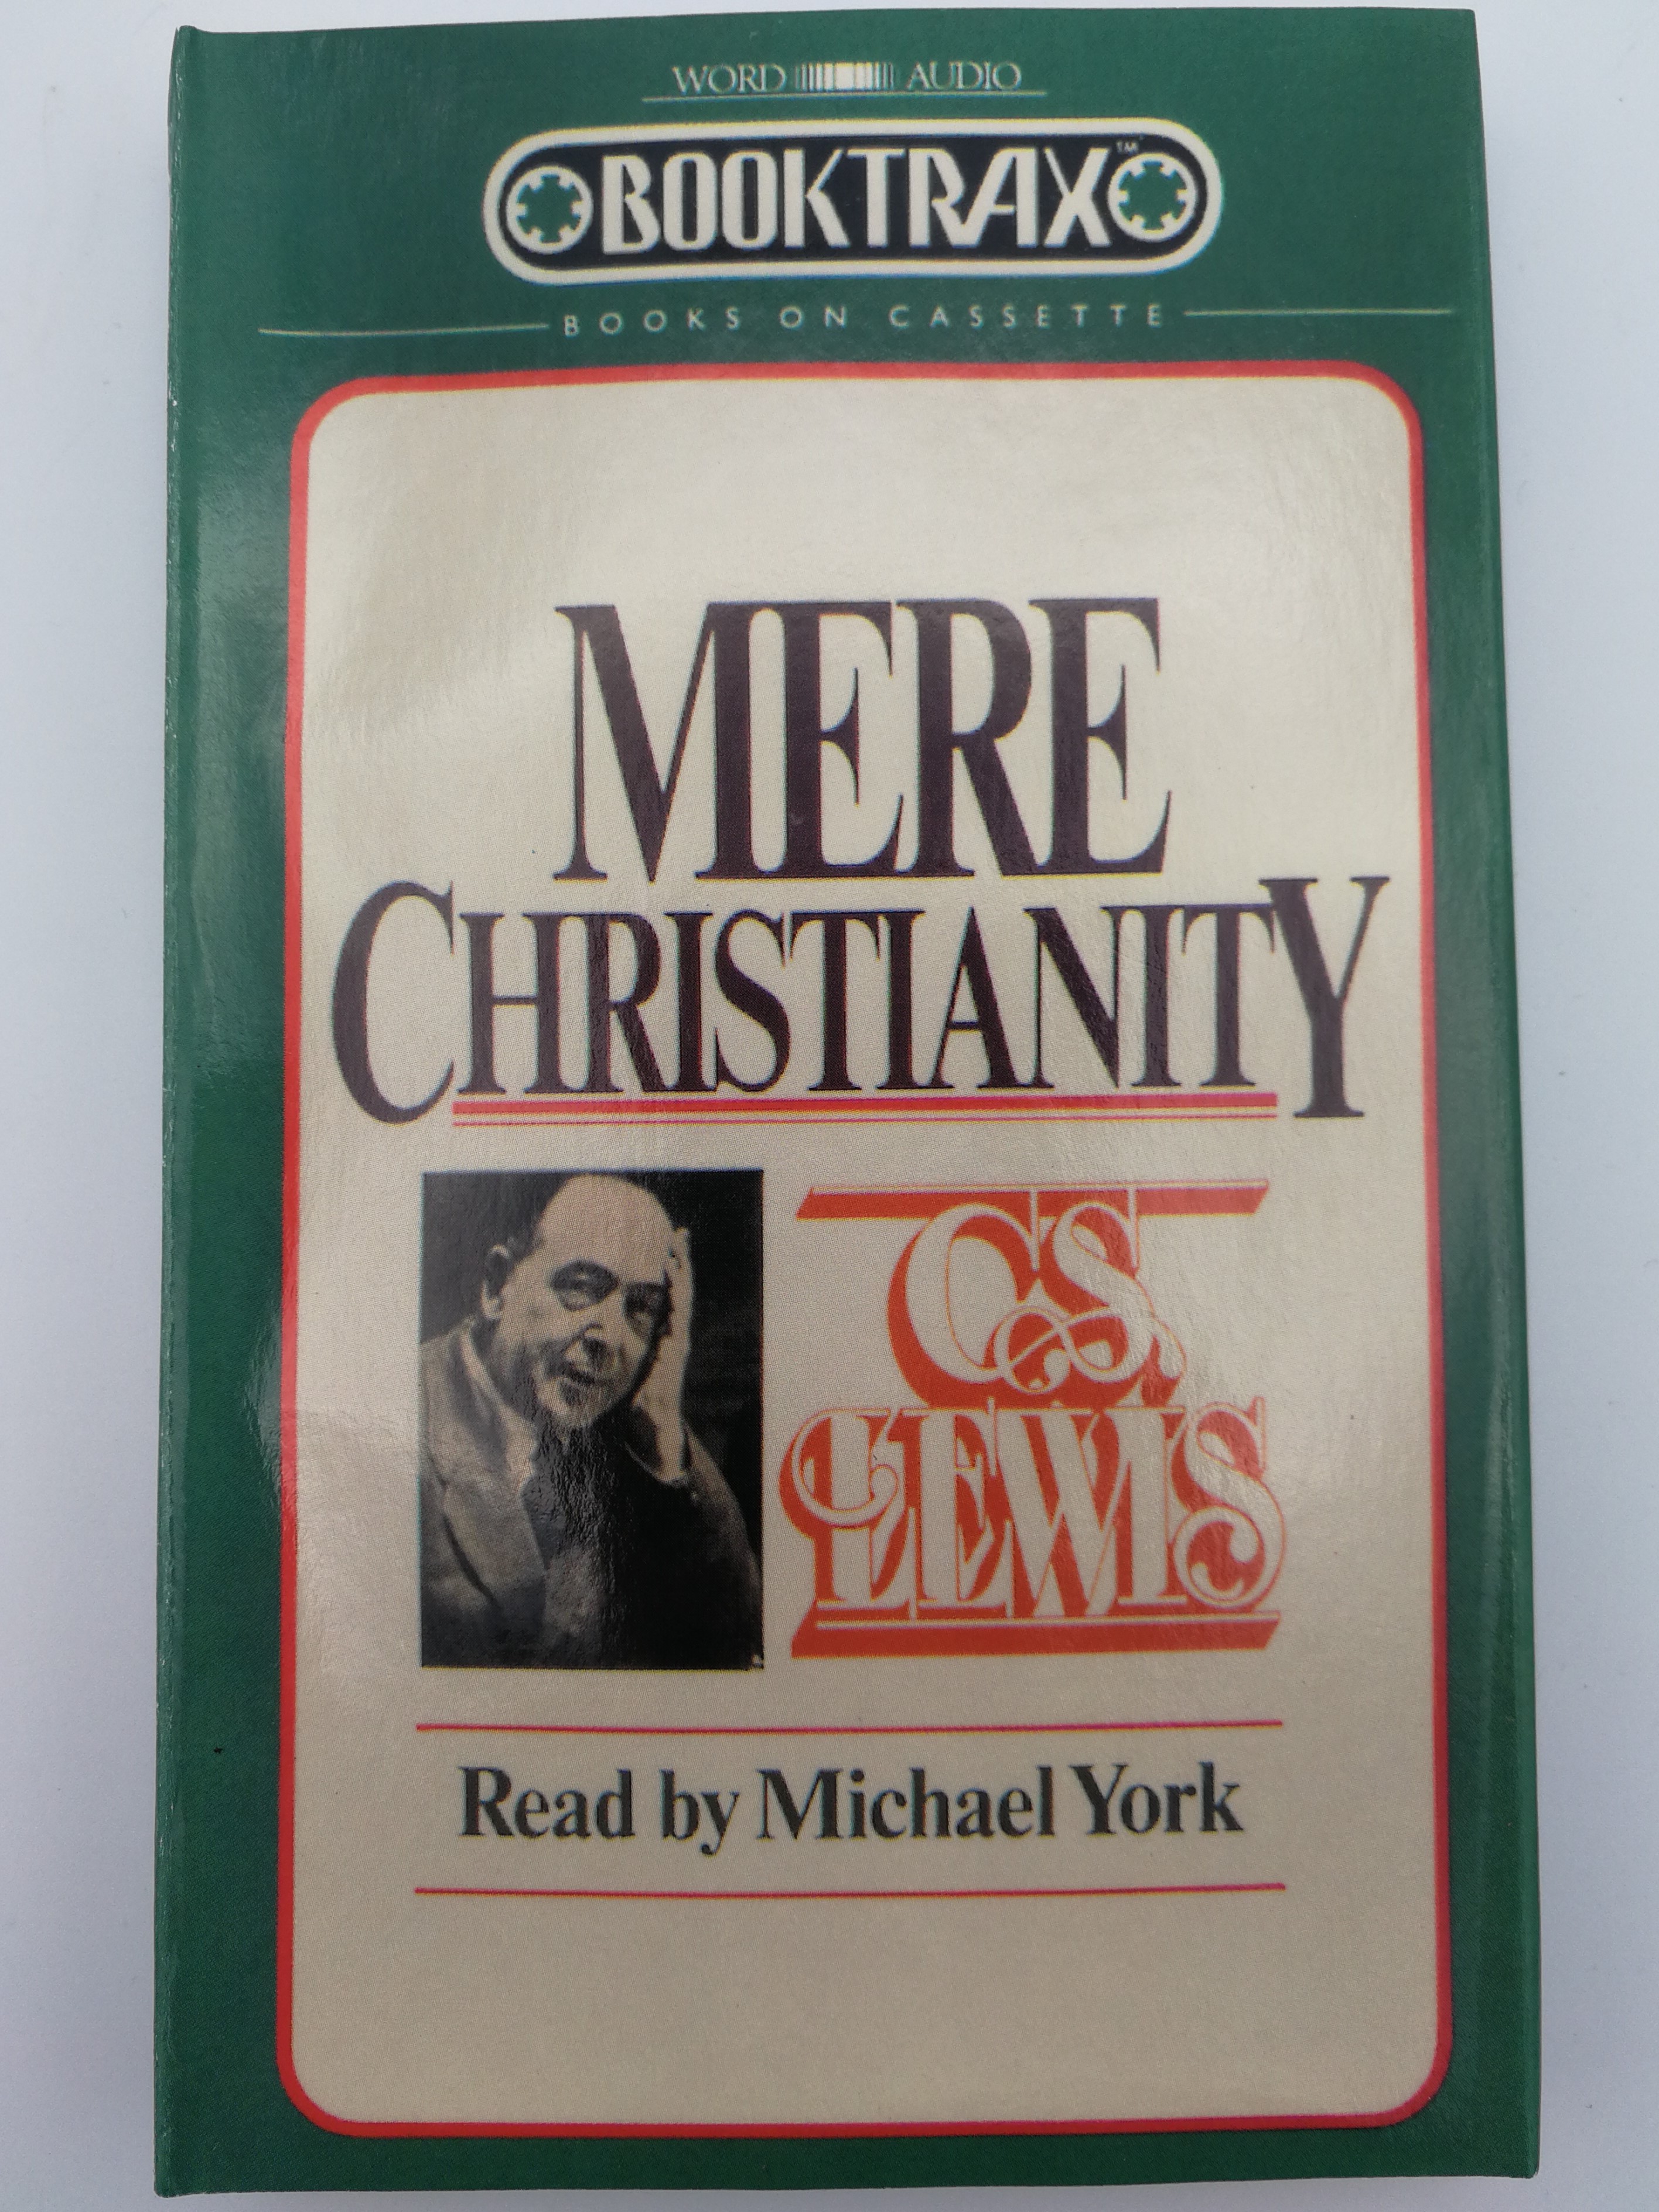 mere-christianity-by-c.s.-lewis-audio-book-cassette-1.jpg